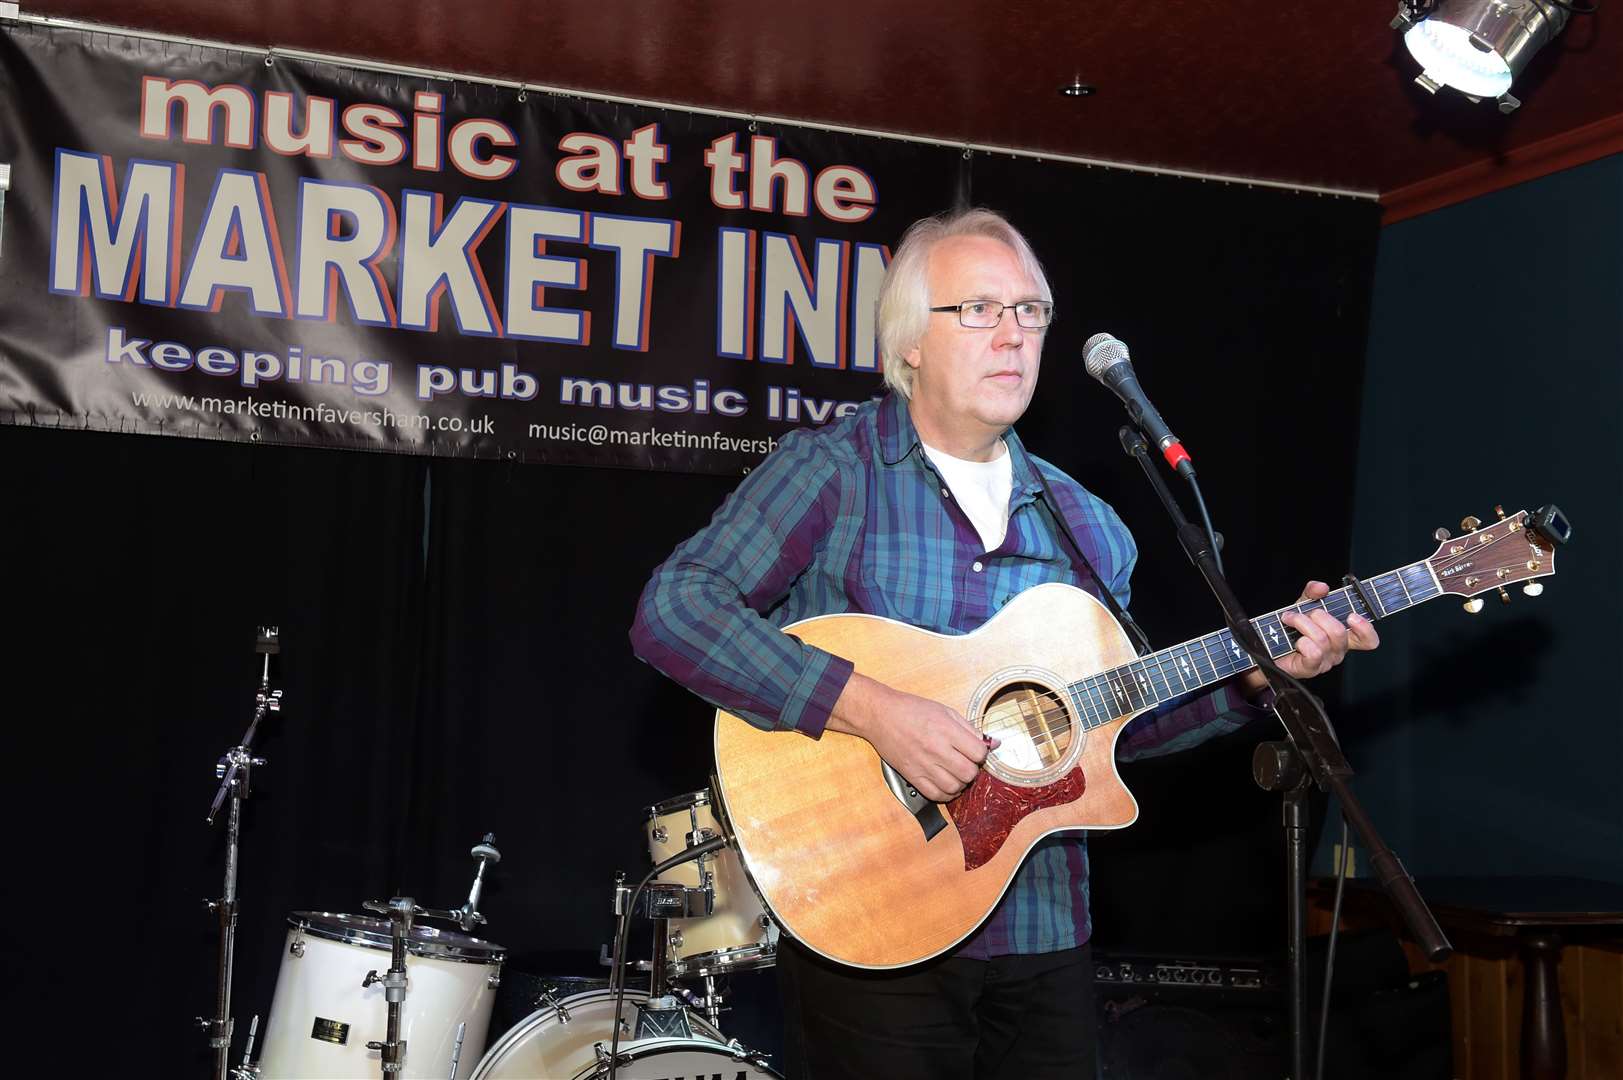 The Market Inn is a regular spot for some of the county's best-known pub bands. Picture: Tony Flashman